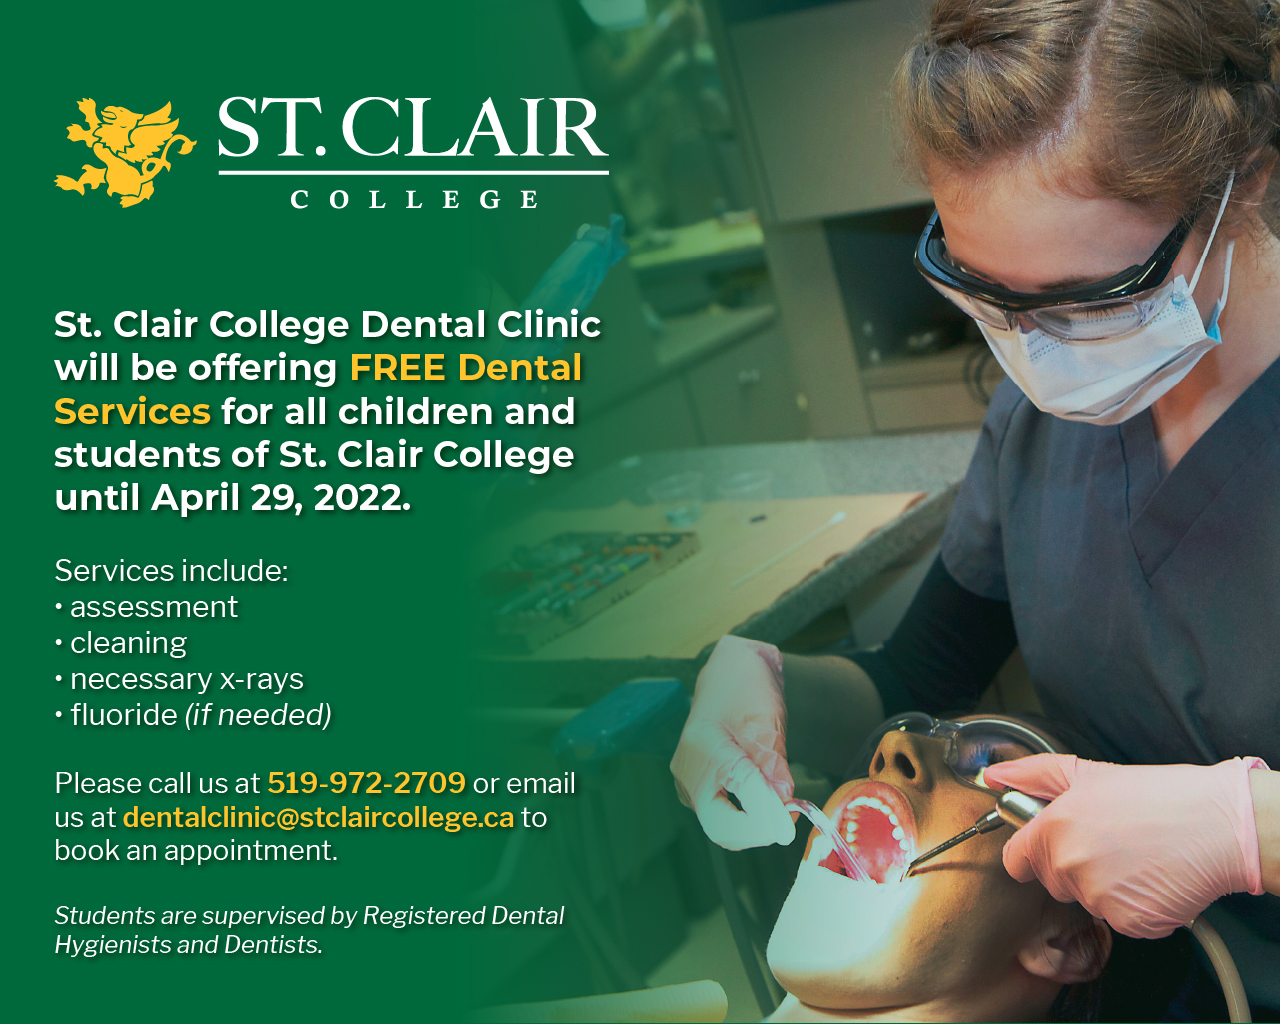 Free dental services for children and St. Clair College students until April 29, 2022